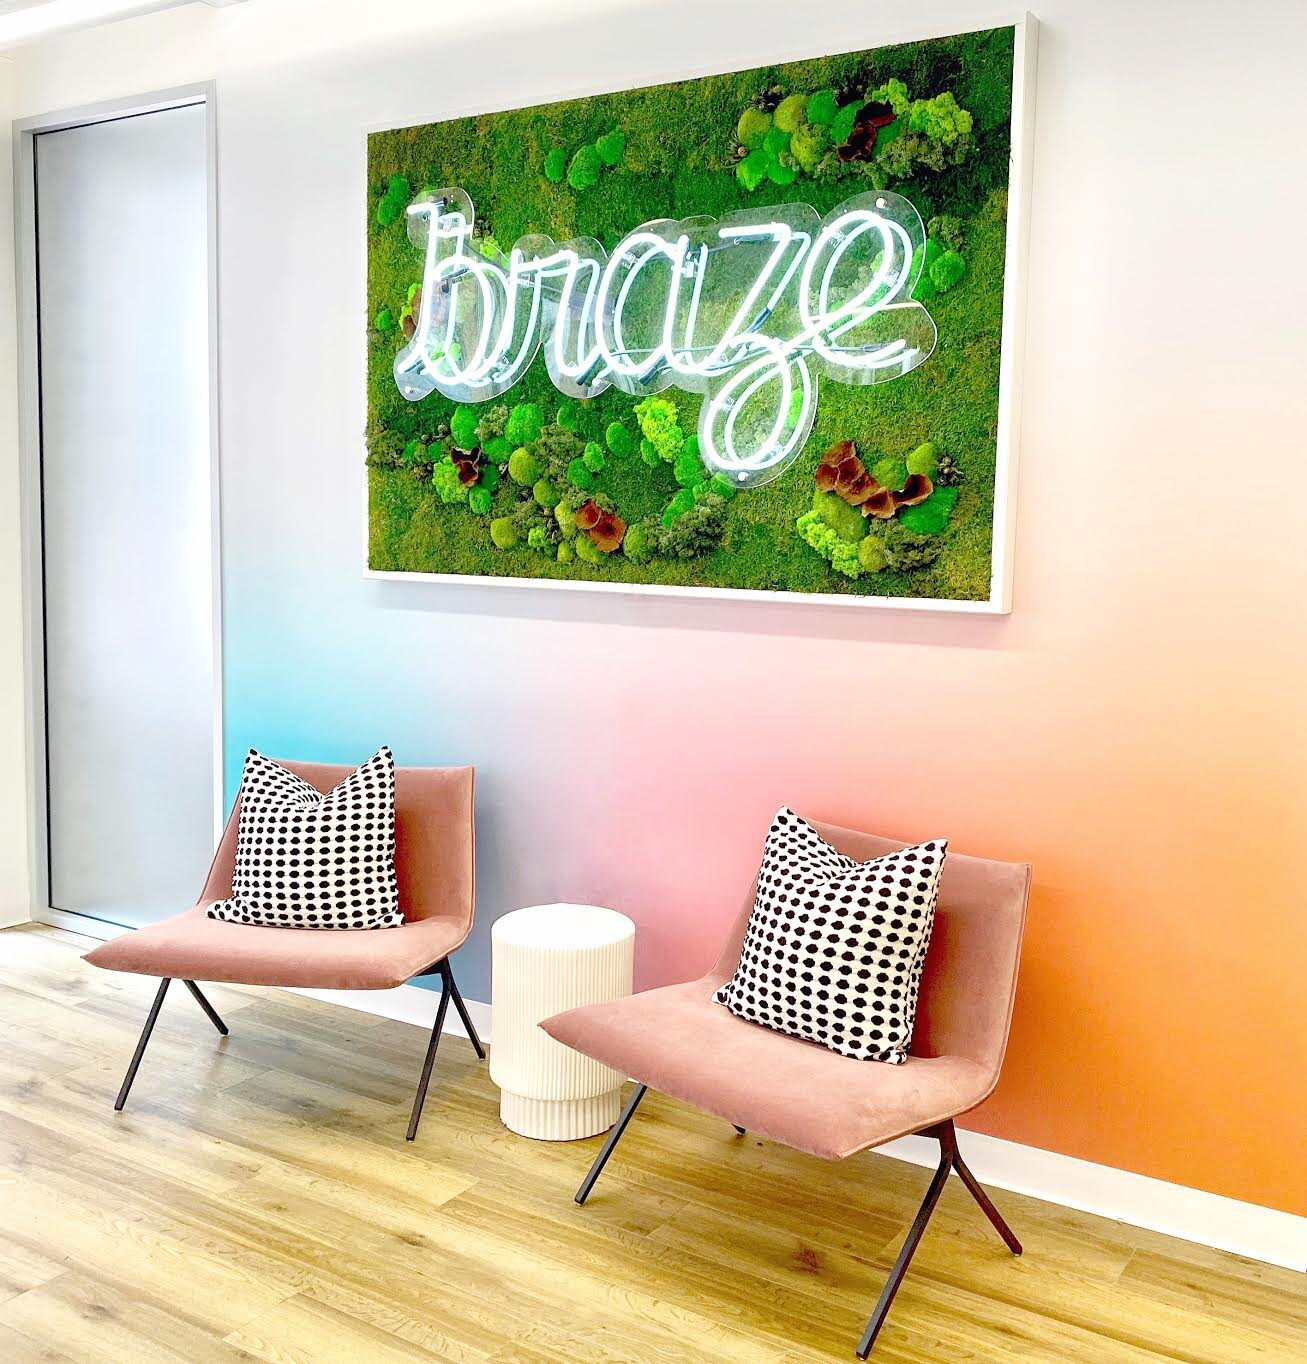 Front lobby of the Braze office with two colorful chairs, pillows and wall art.